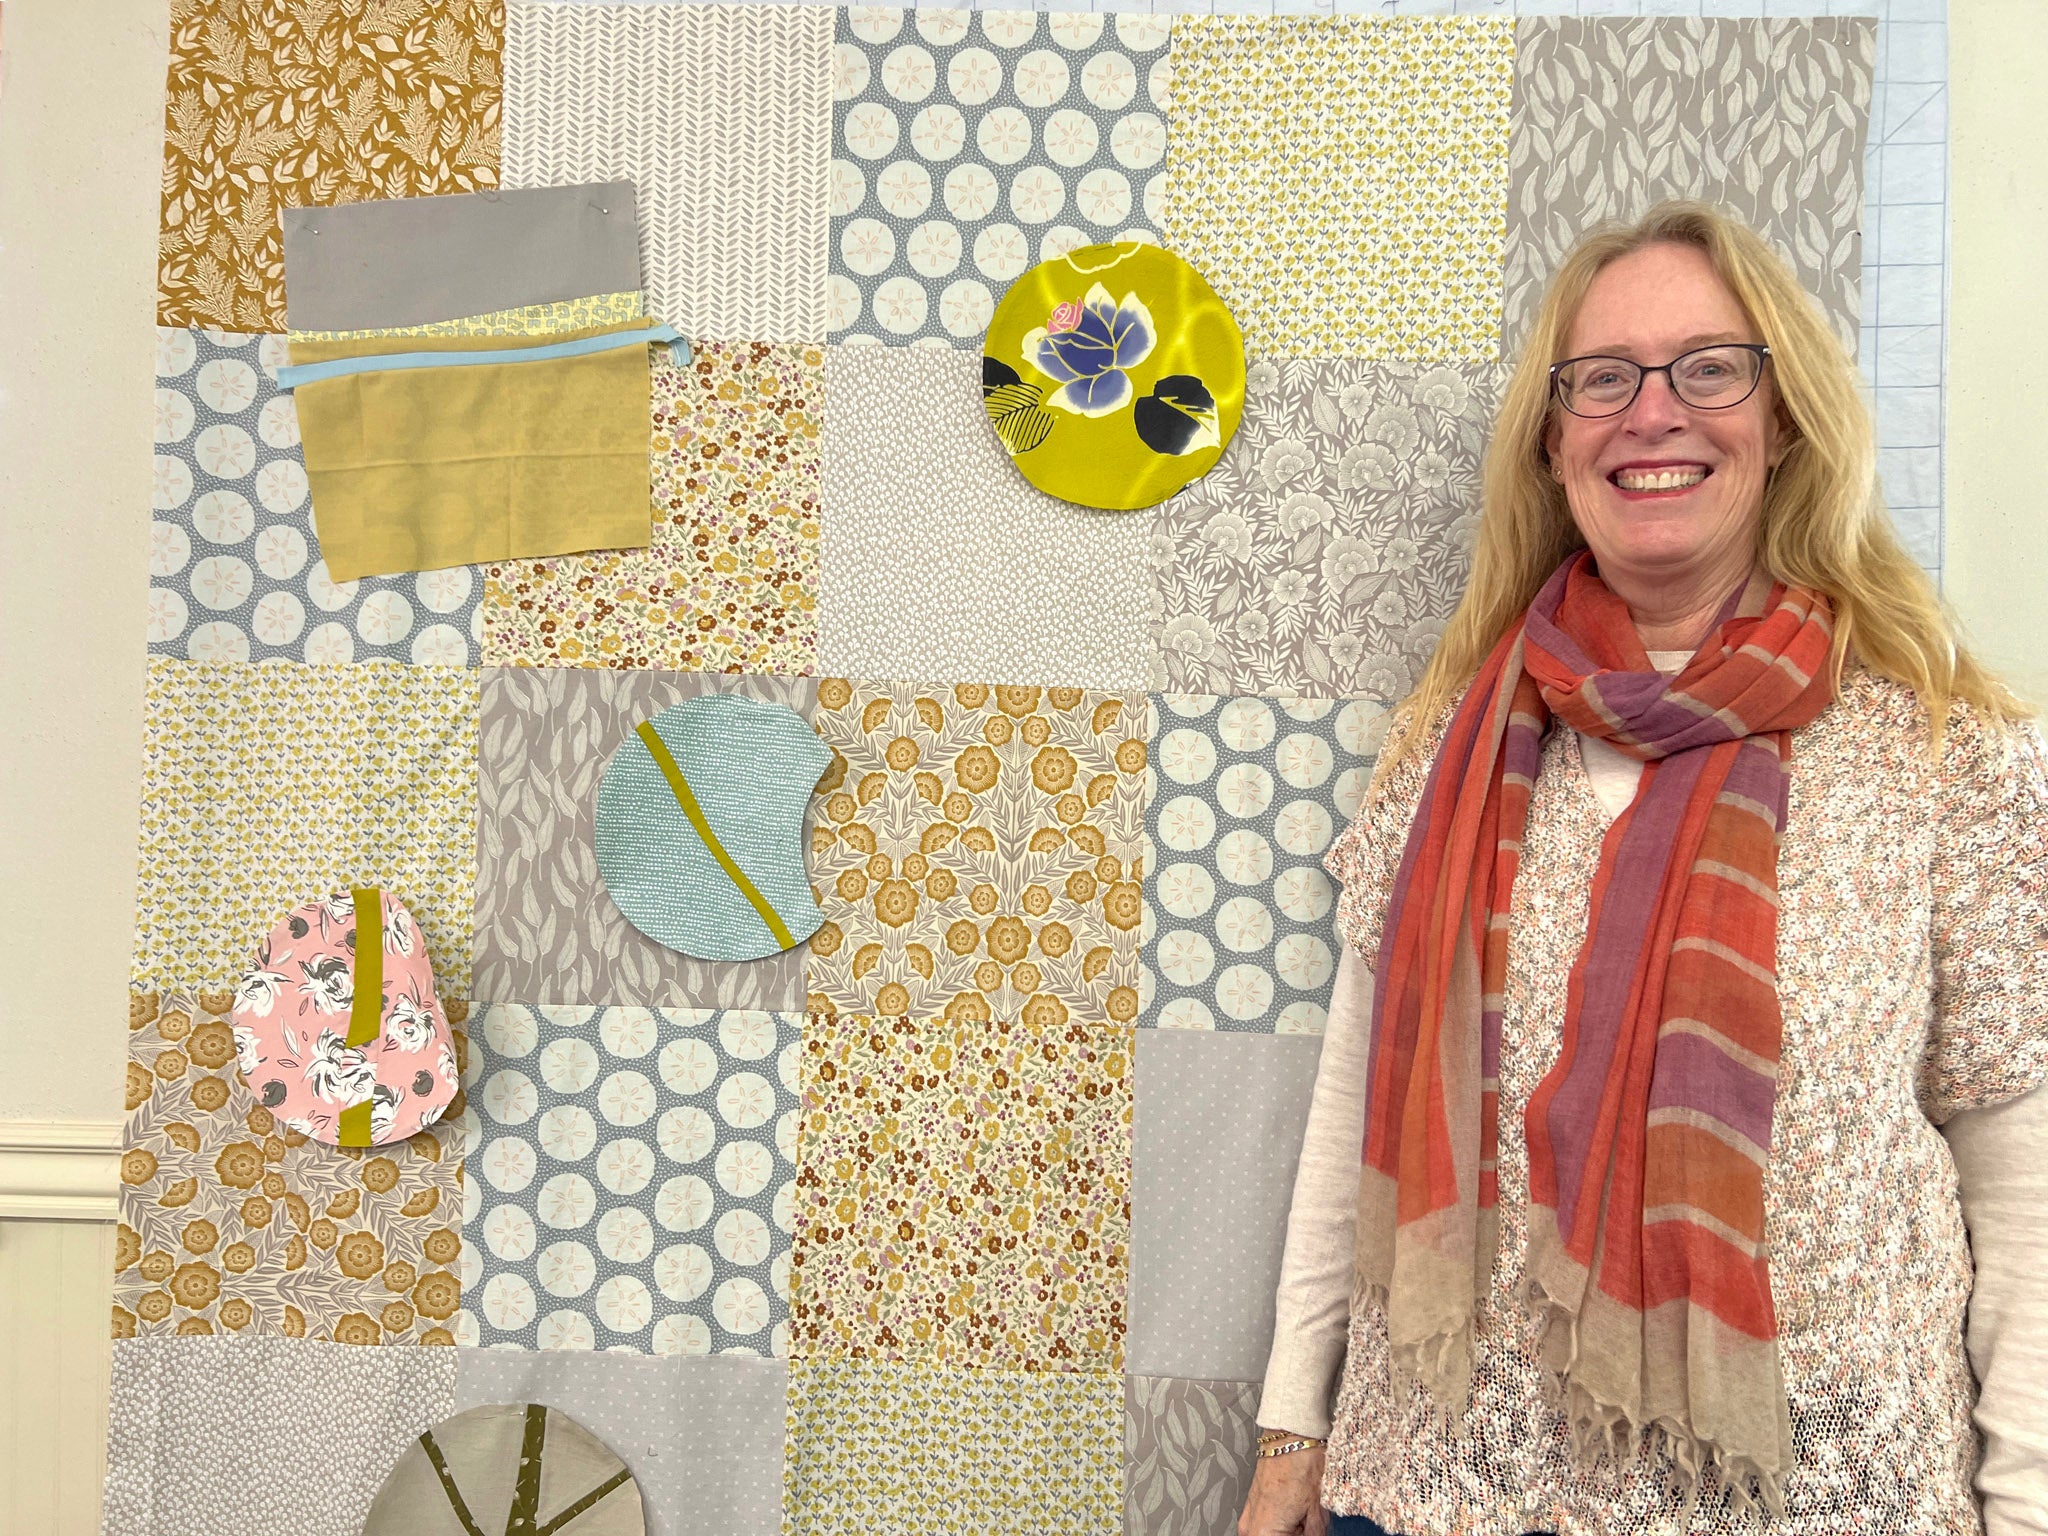 Circle of Life quilting workshop with Patricia Belyea of Okan Arts